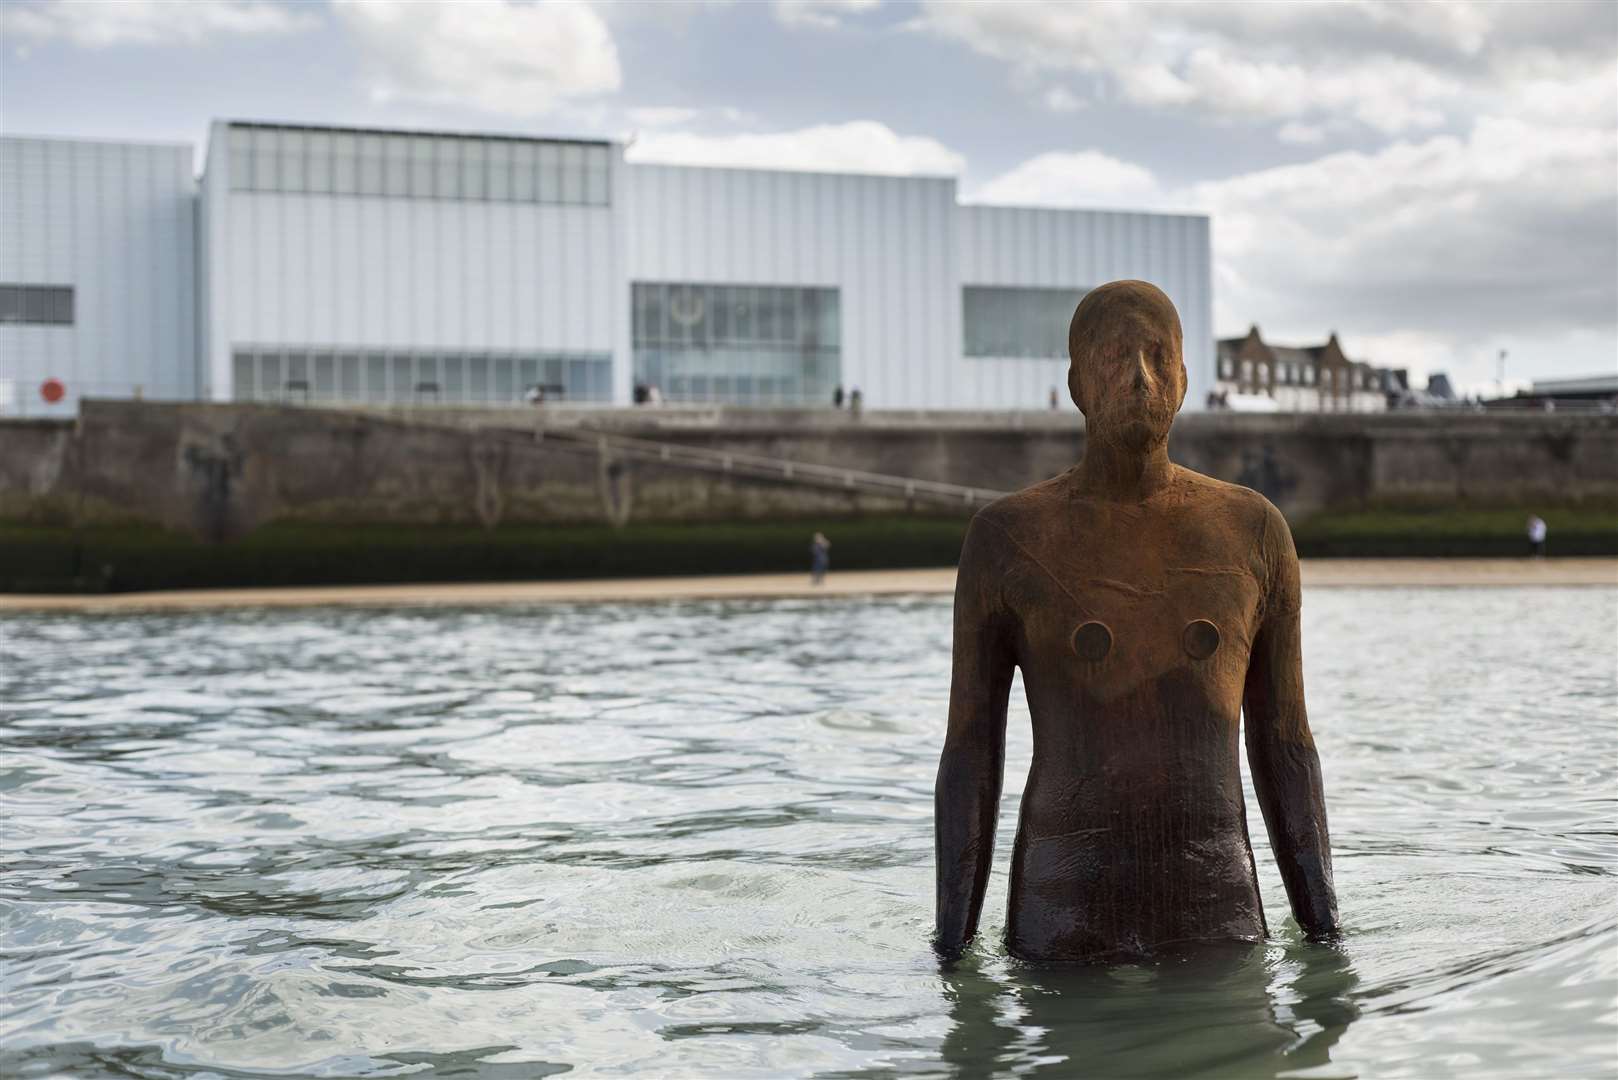 Antony Gormley's sculpture Another Time outside the Turner in Margate